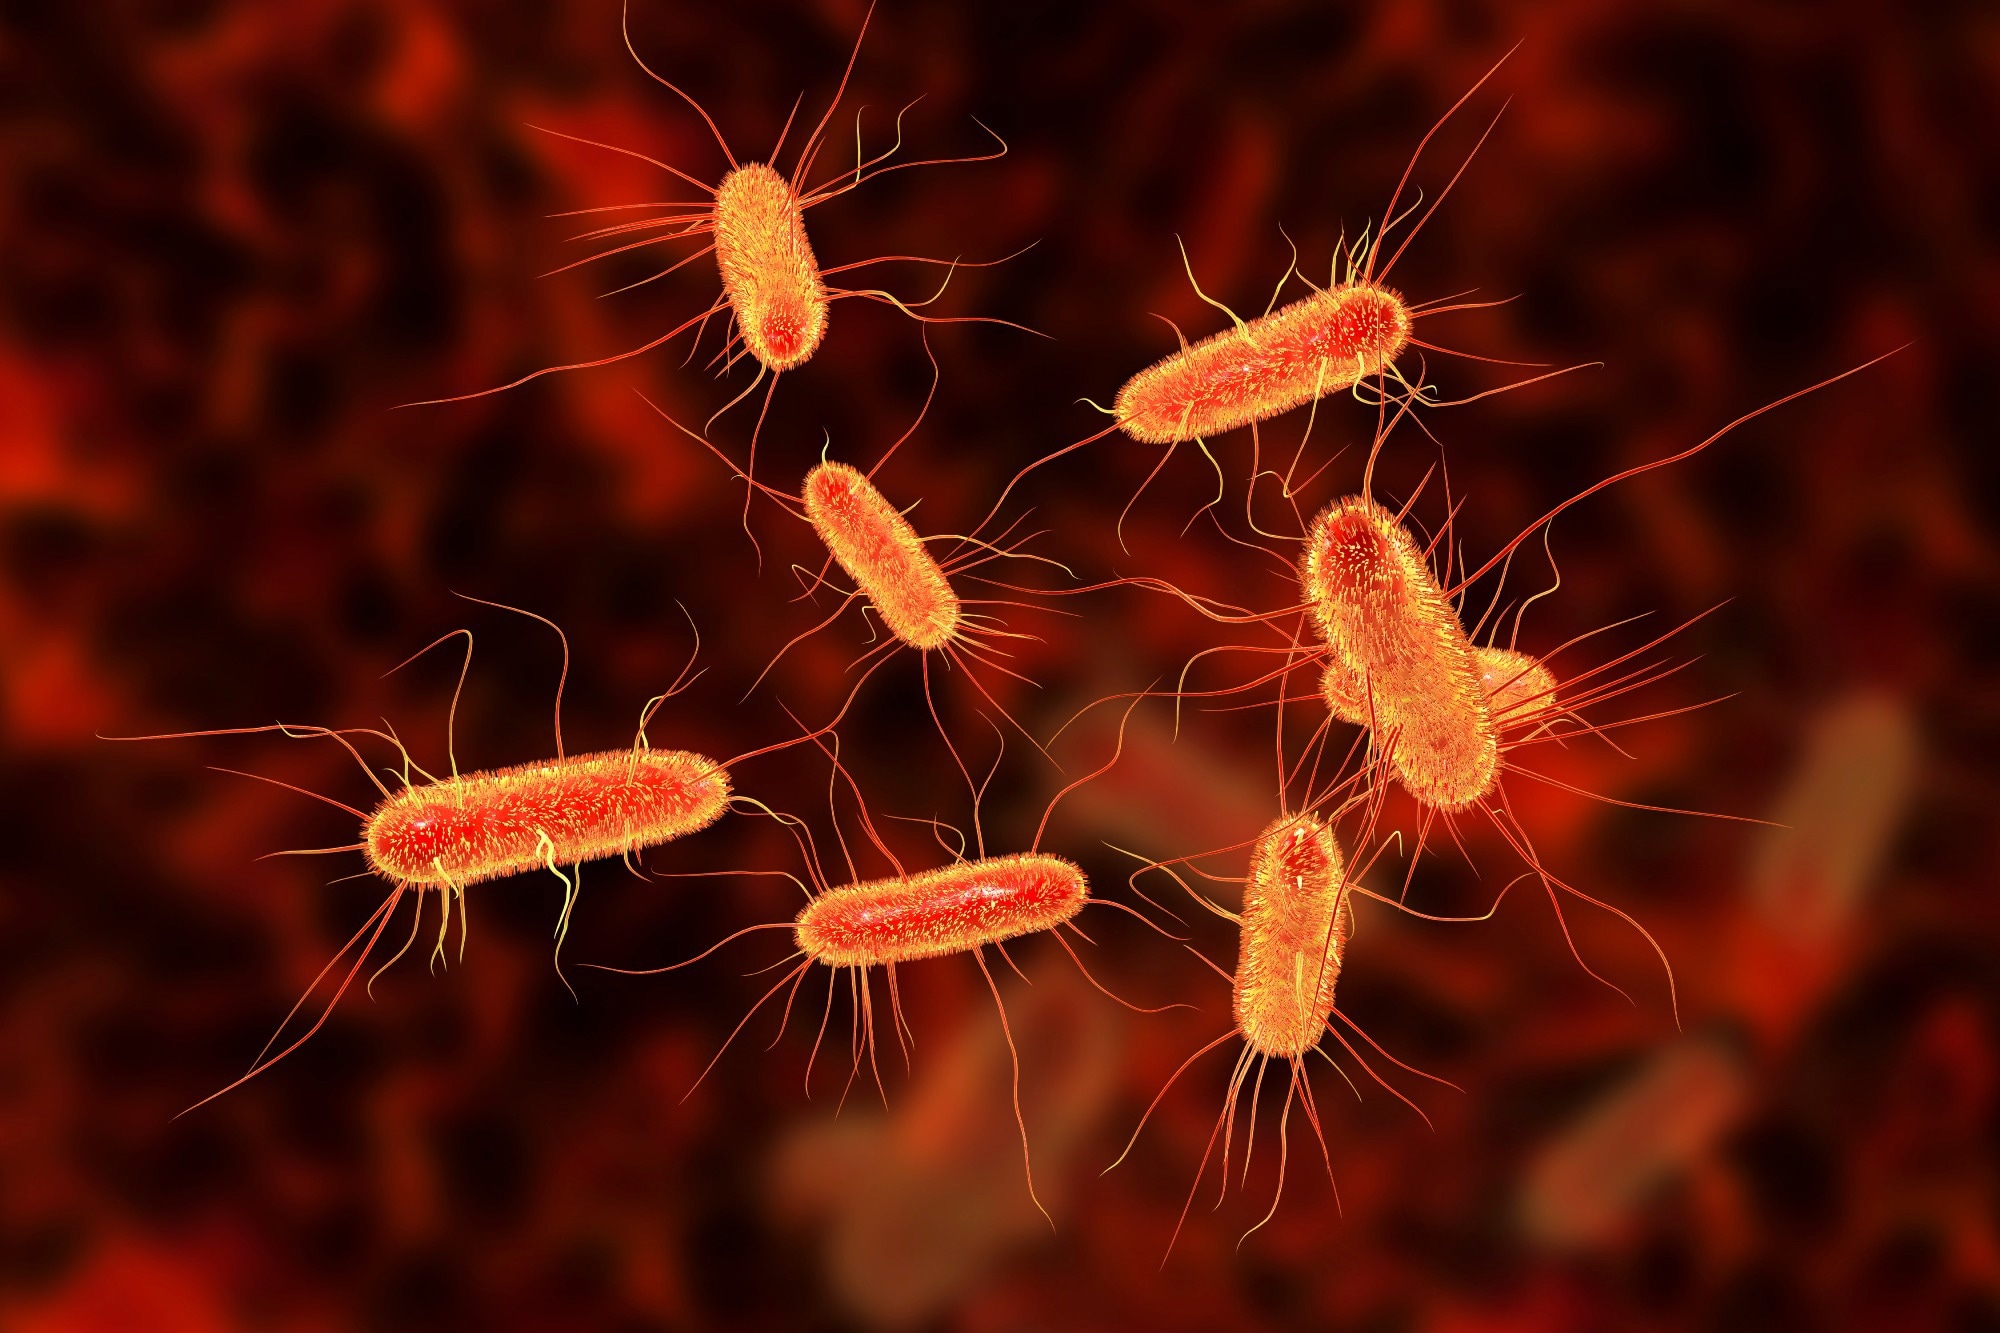 Study: Laboratory diagnosed microbial infection in English UK Biobank participants in comparison to the general population. Image Credit: Kateryna Kon / Shutterstock